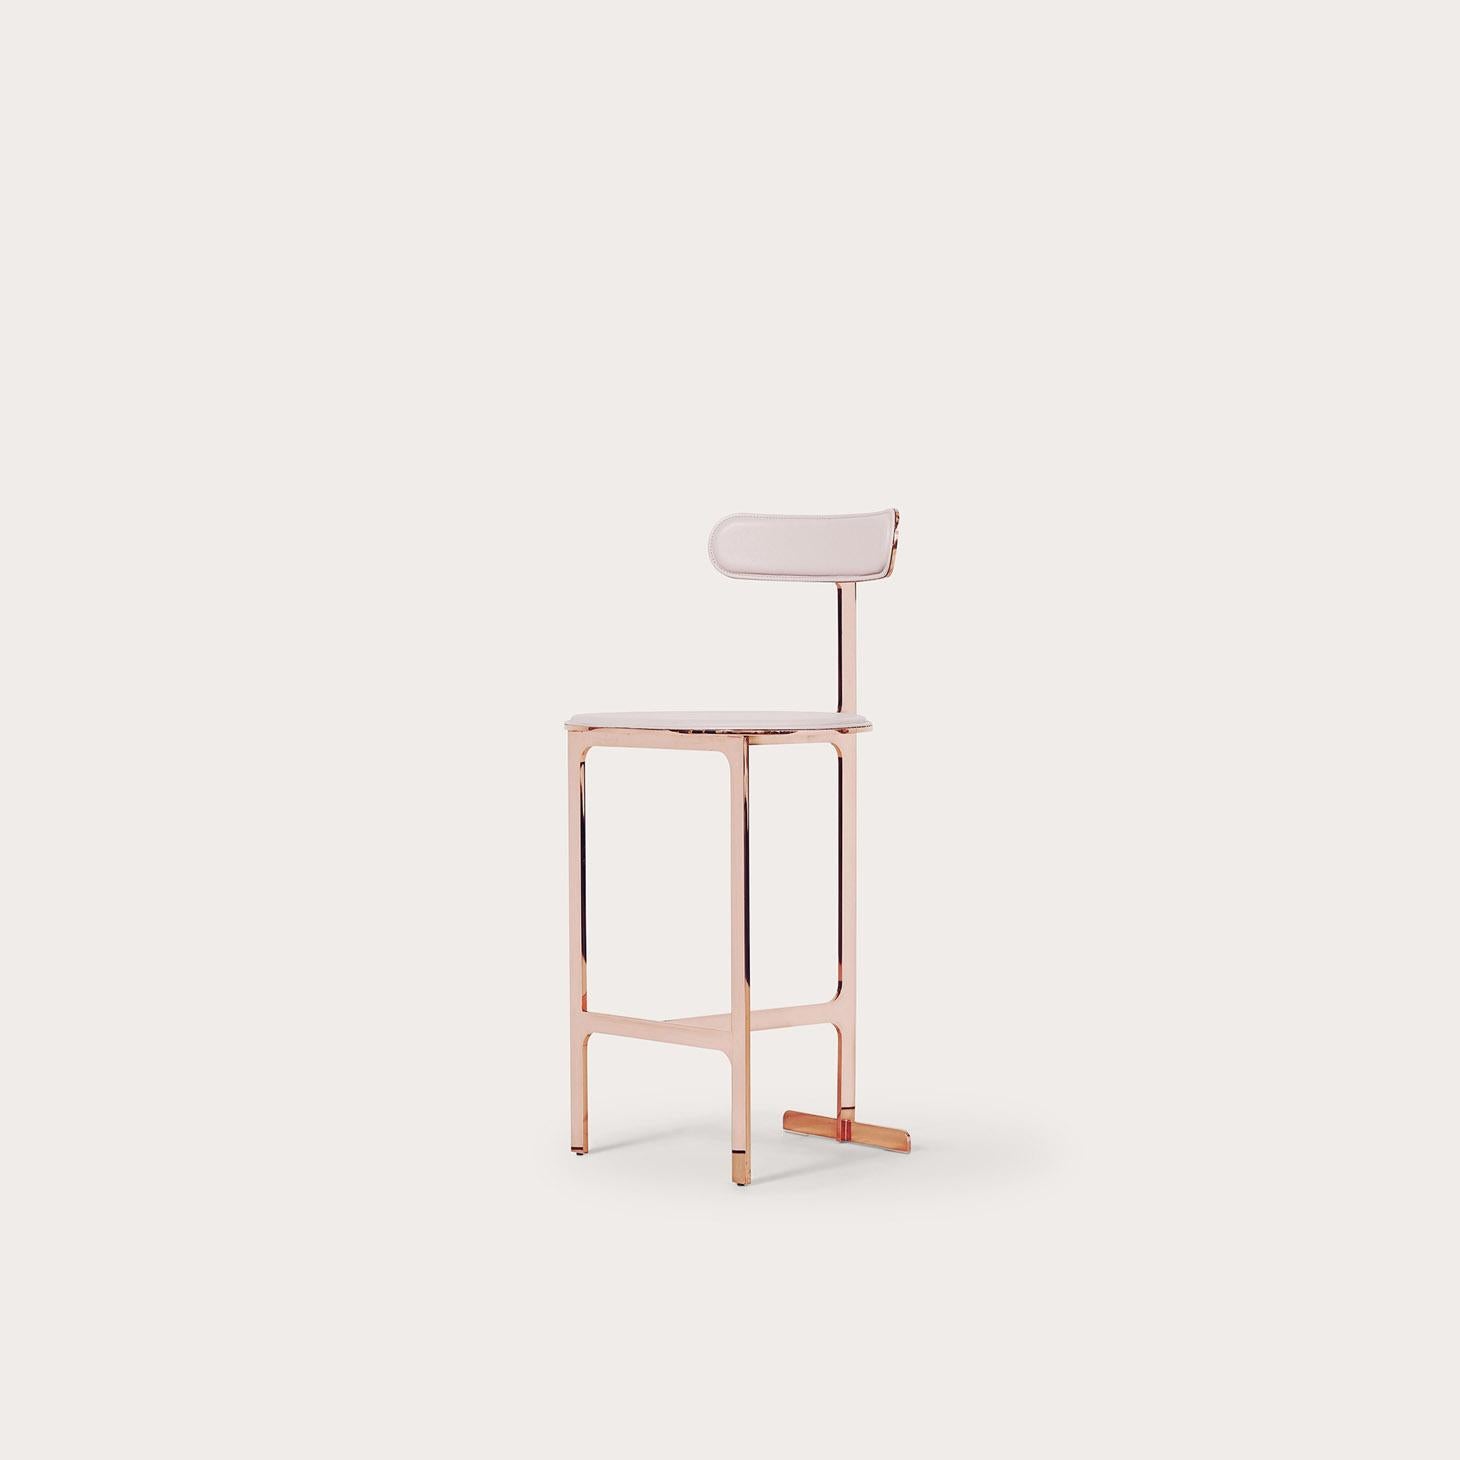 Park place is in the heart of the most famous skyline in the world. The strong simple lines metal structure of the Park Place stools and chair by Yabu Pushelberg are reminiscent of the skyscrapers that tower above Manhattan.

Some stock available